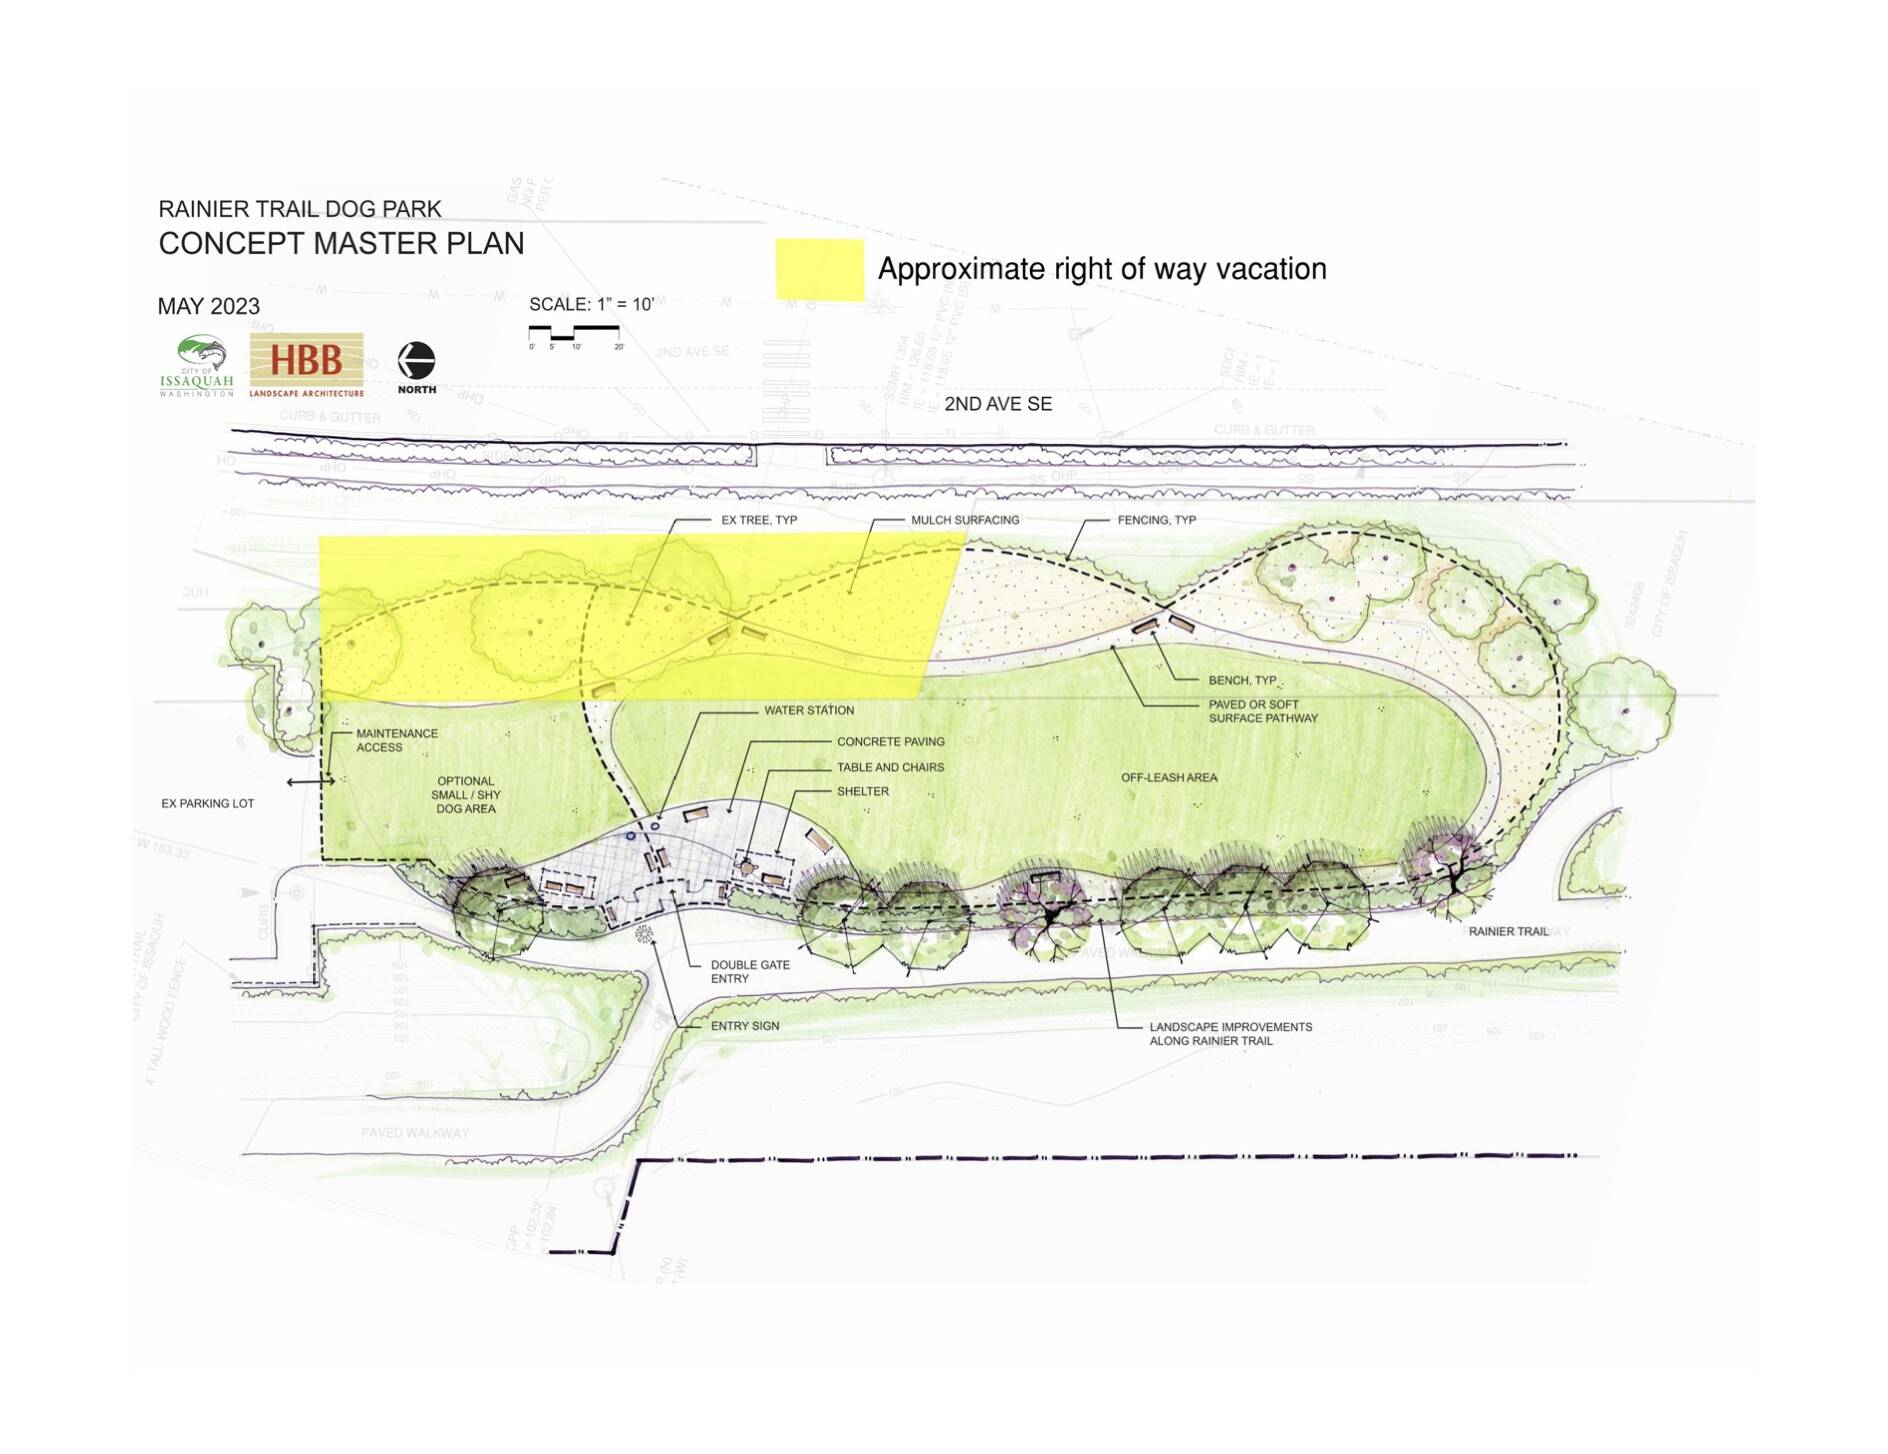 Potential off-leash dog park design. The yellow areas is where the portion of 2nd Ave. SE will be vacated. (Screenshot from agenda bill 8687)